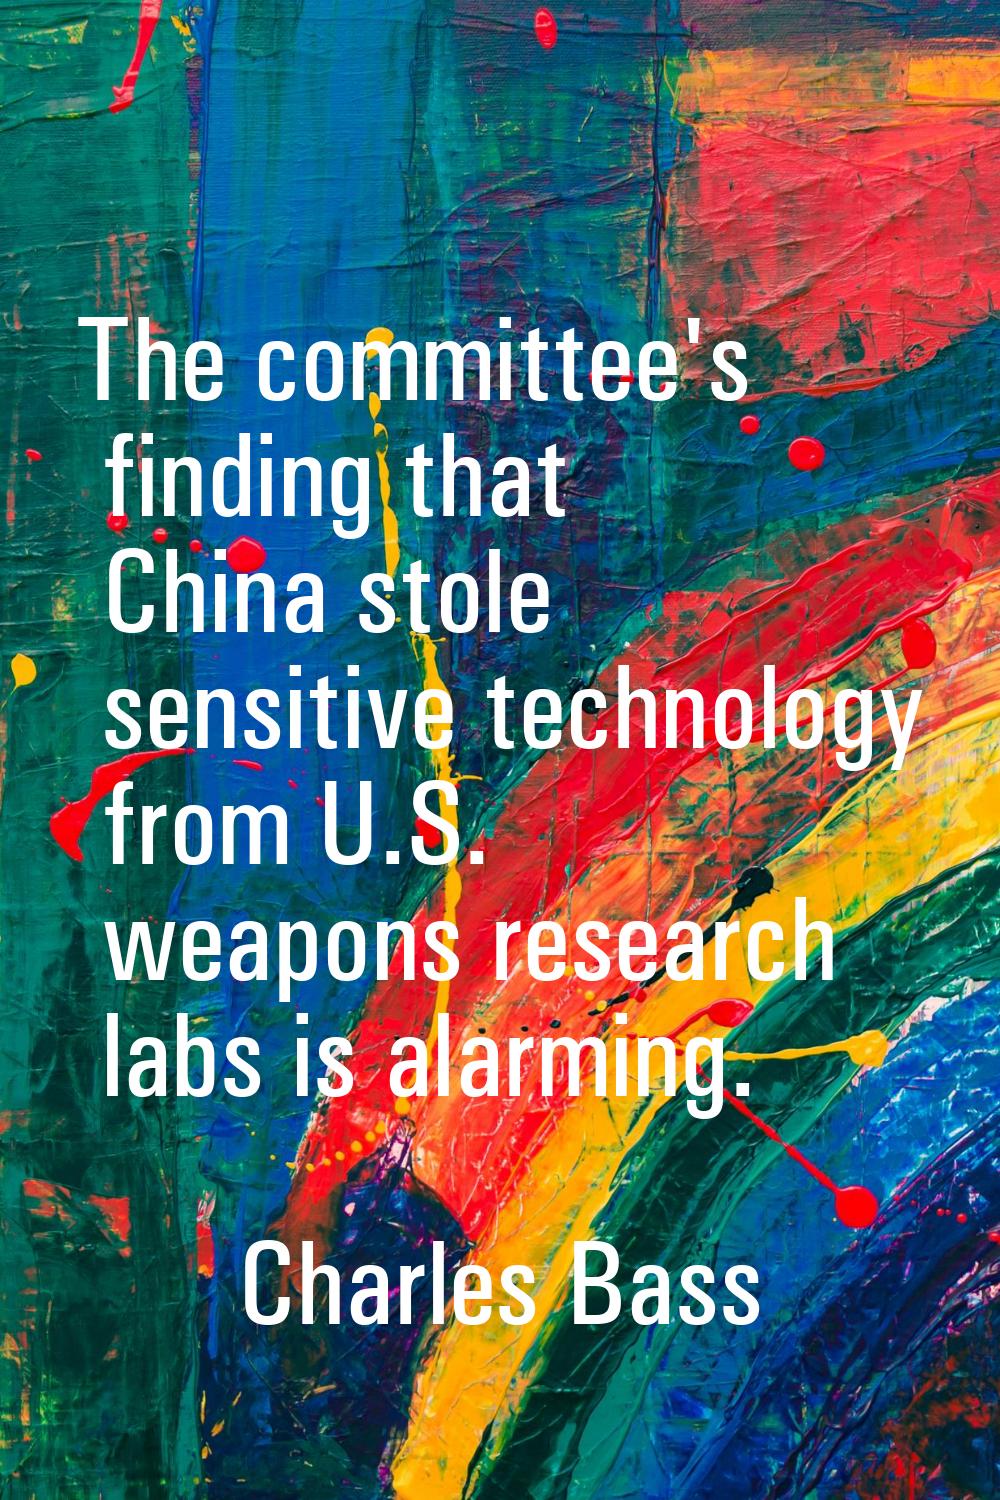 The committee's finding that China stole sensitive technology from U.S. weapons research labs is al